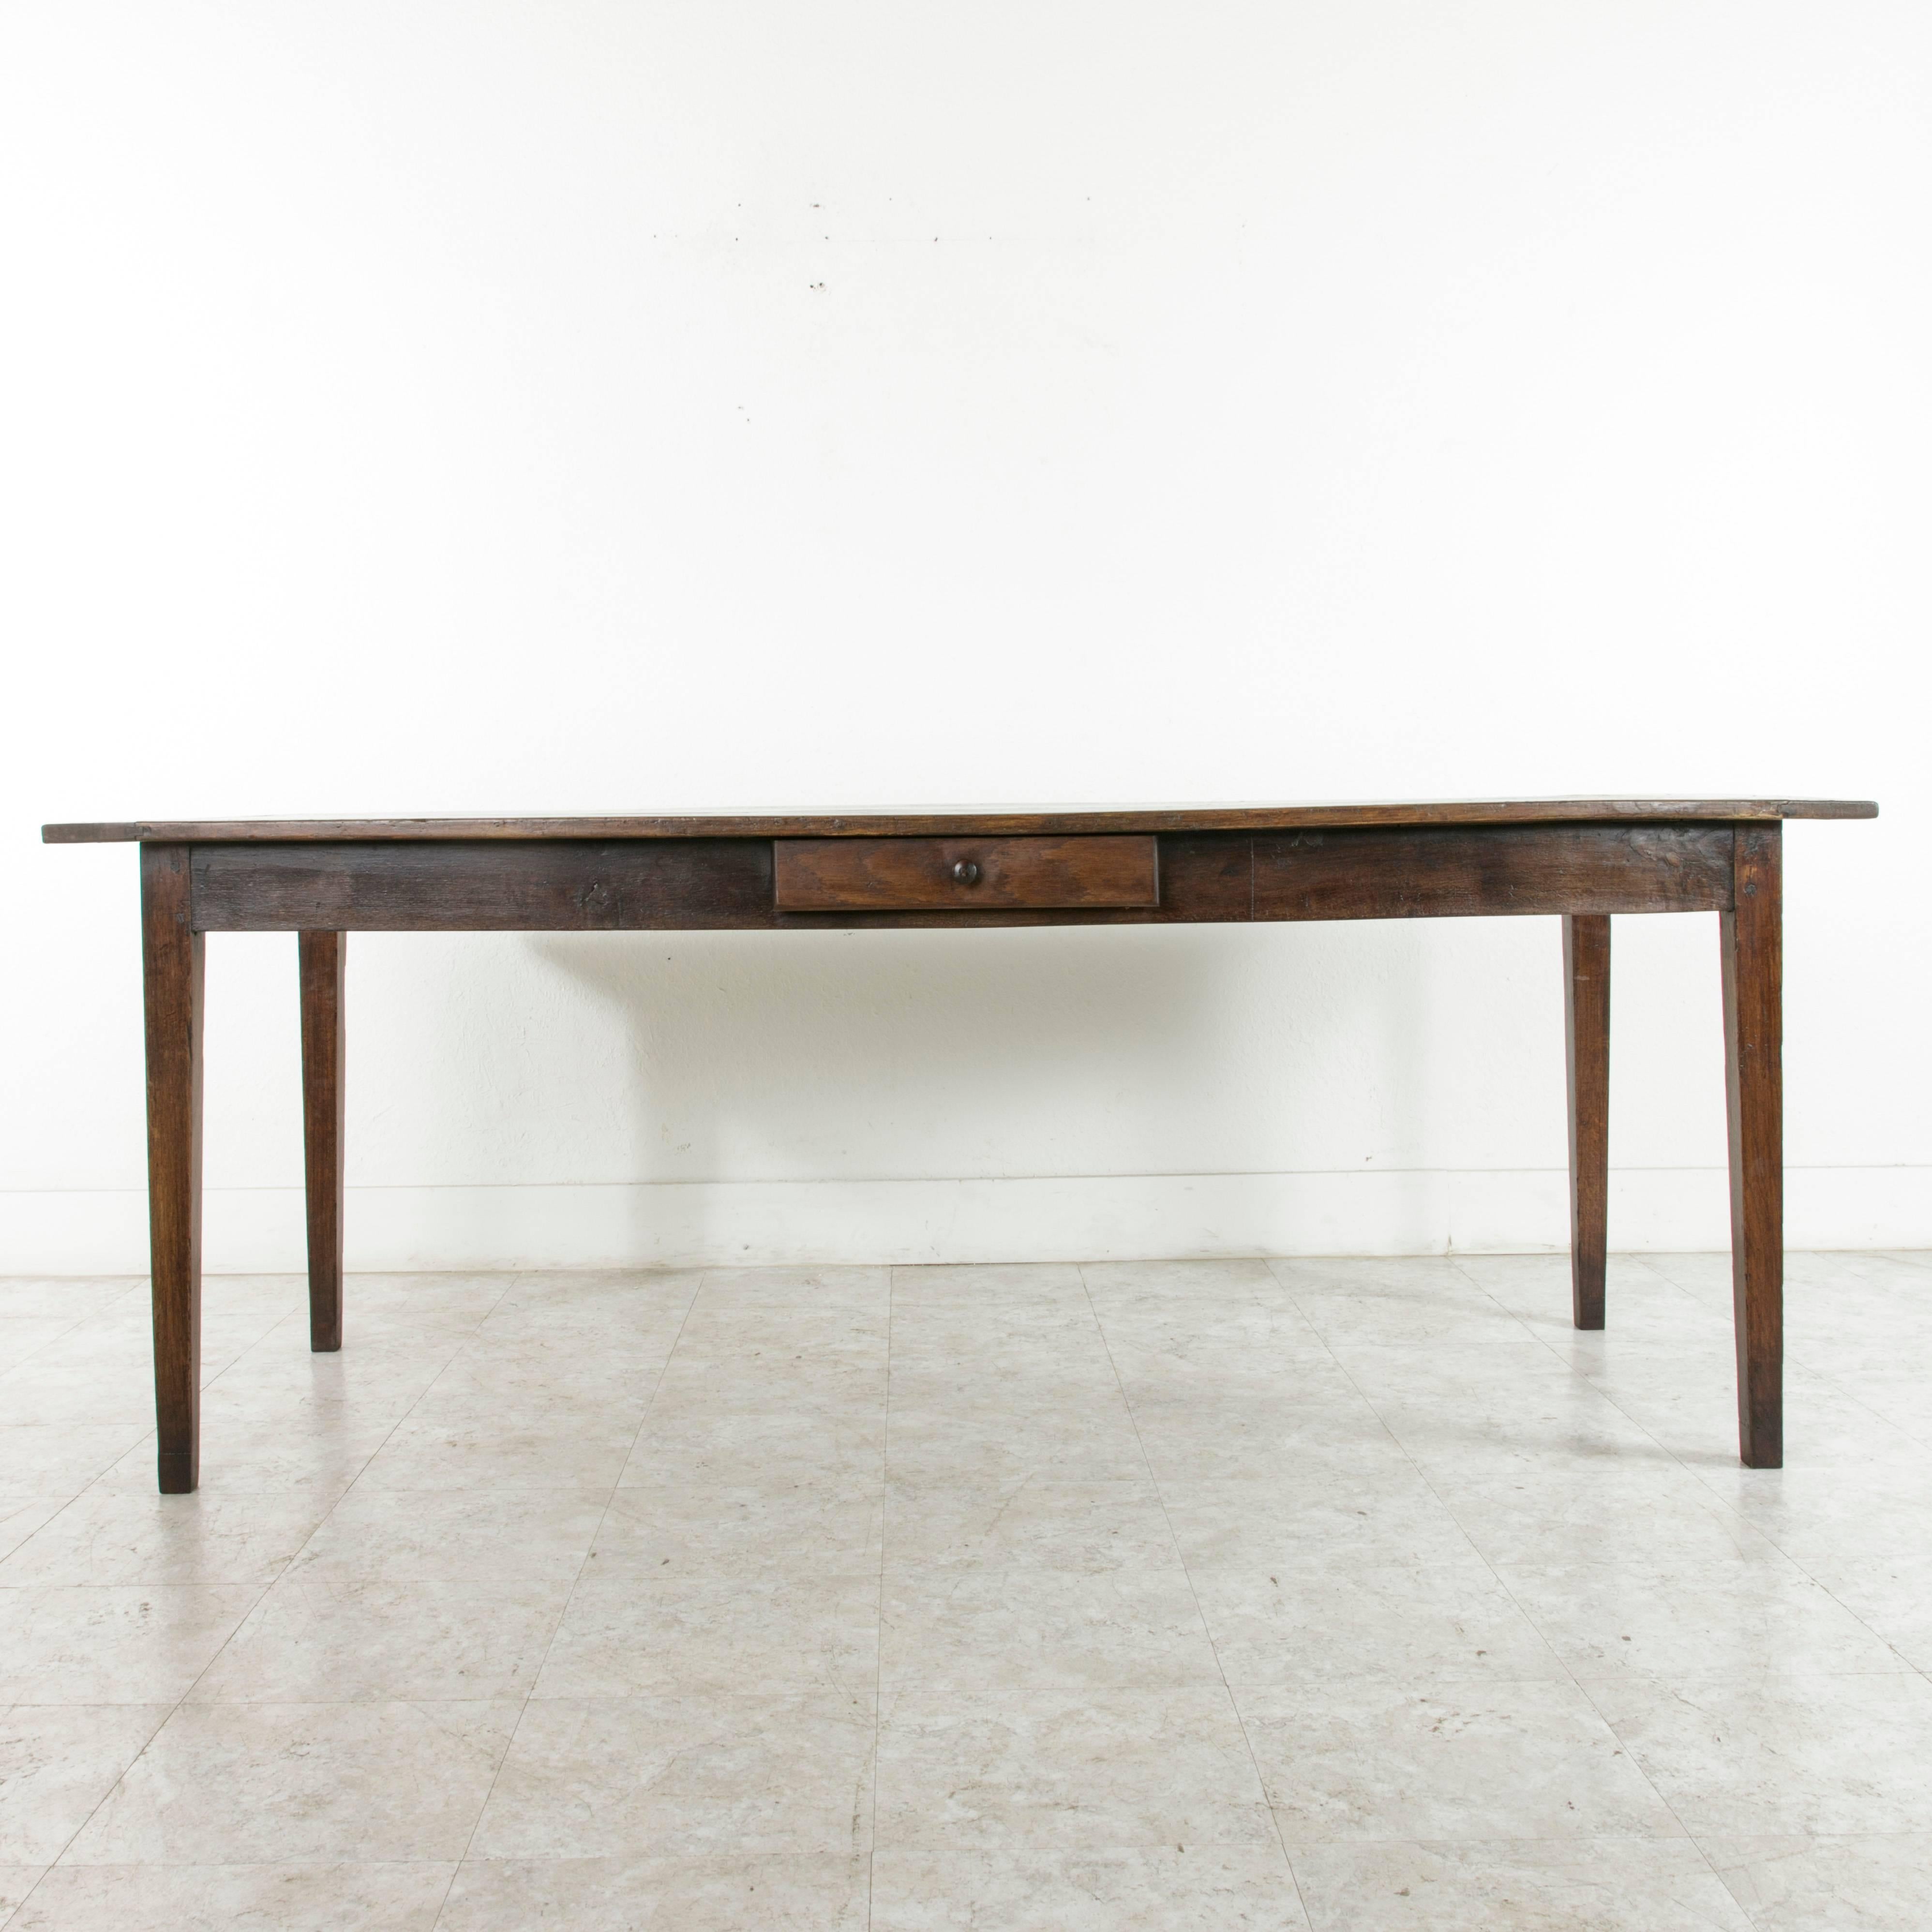 Rustic French Artisan-Made Poplar Farm Table or Dining Table with Single Drawer